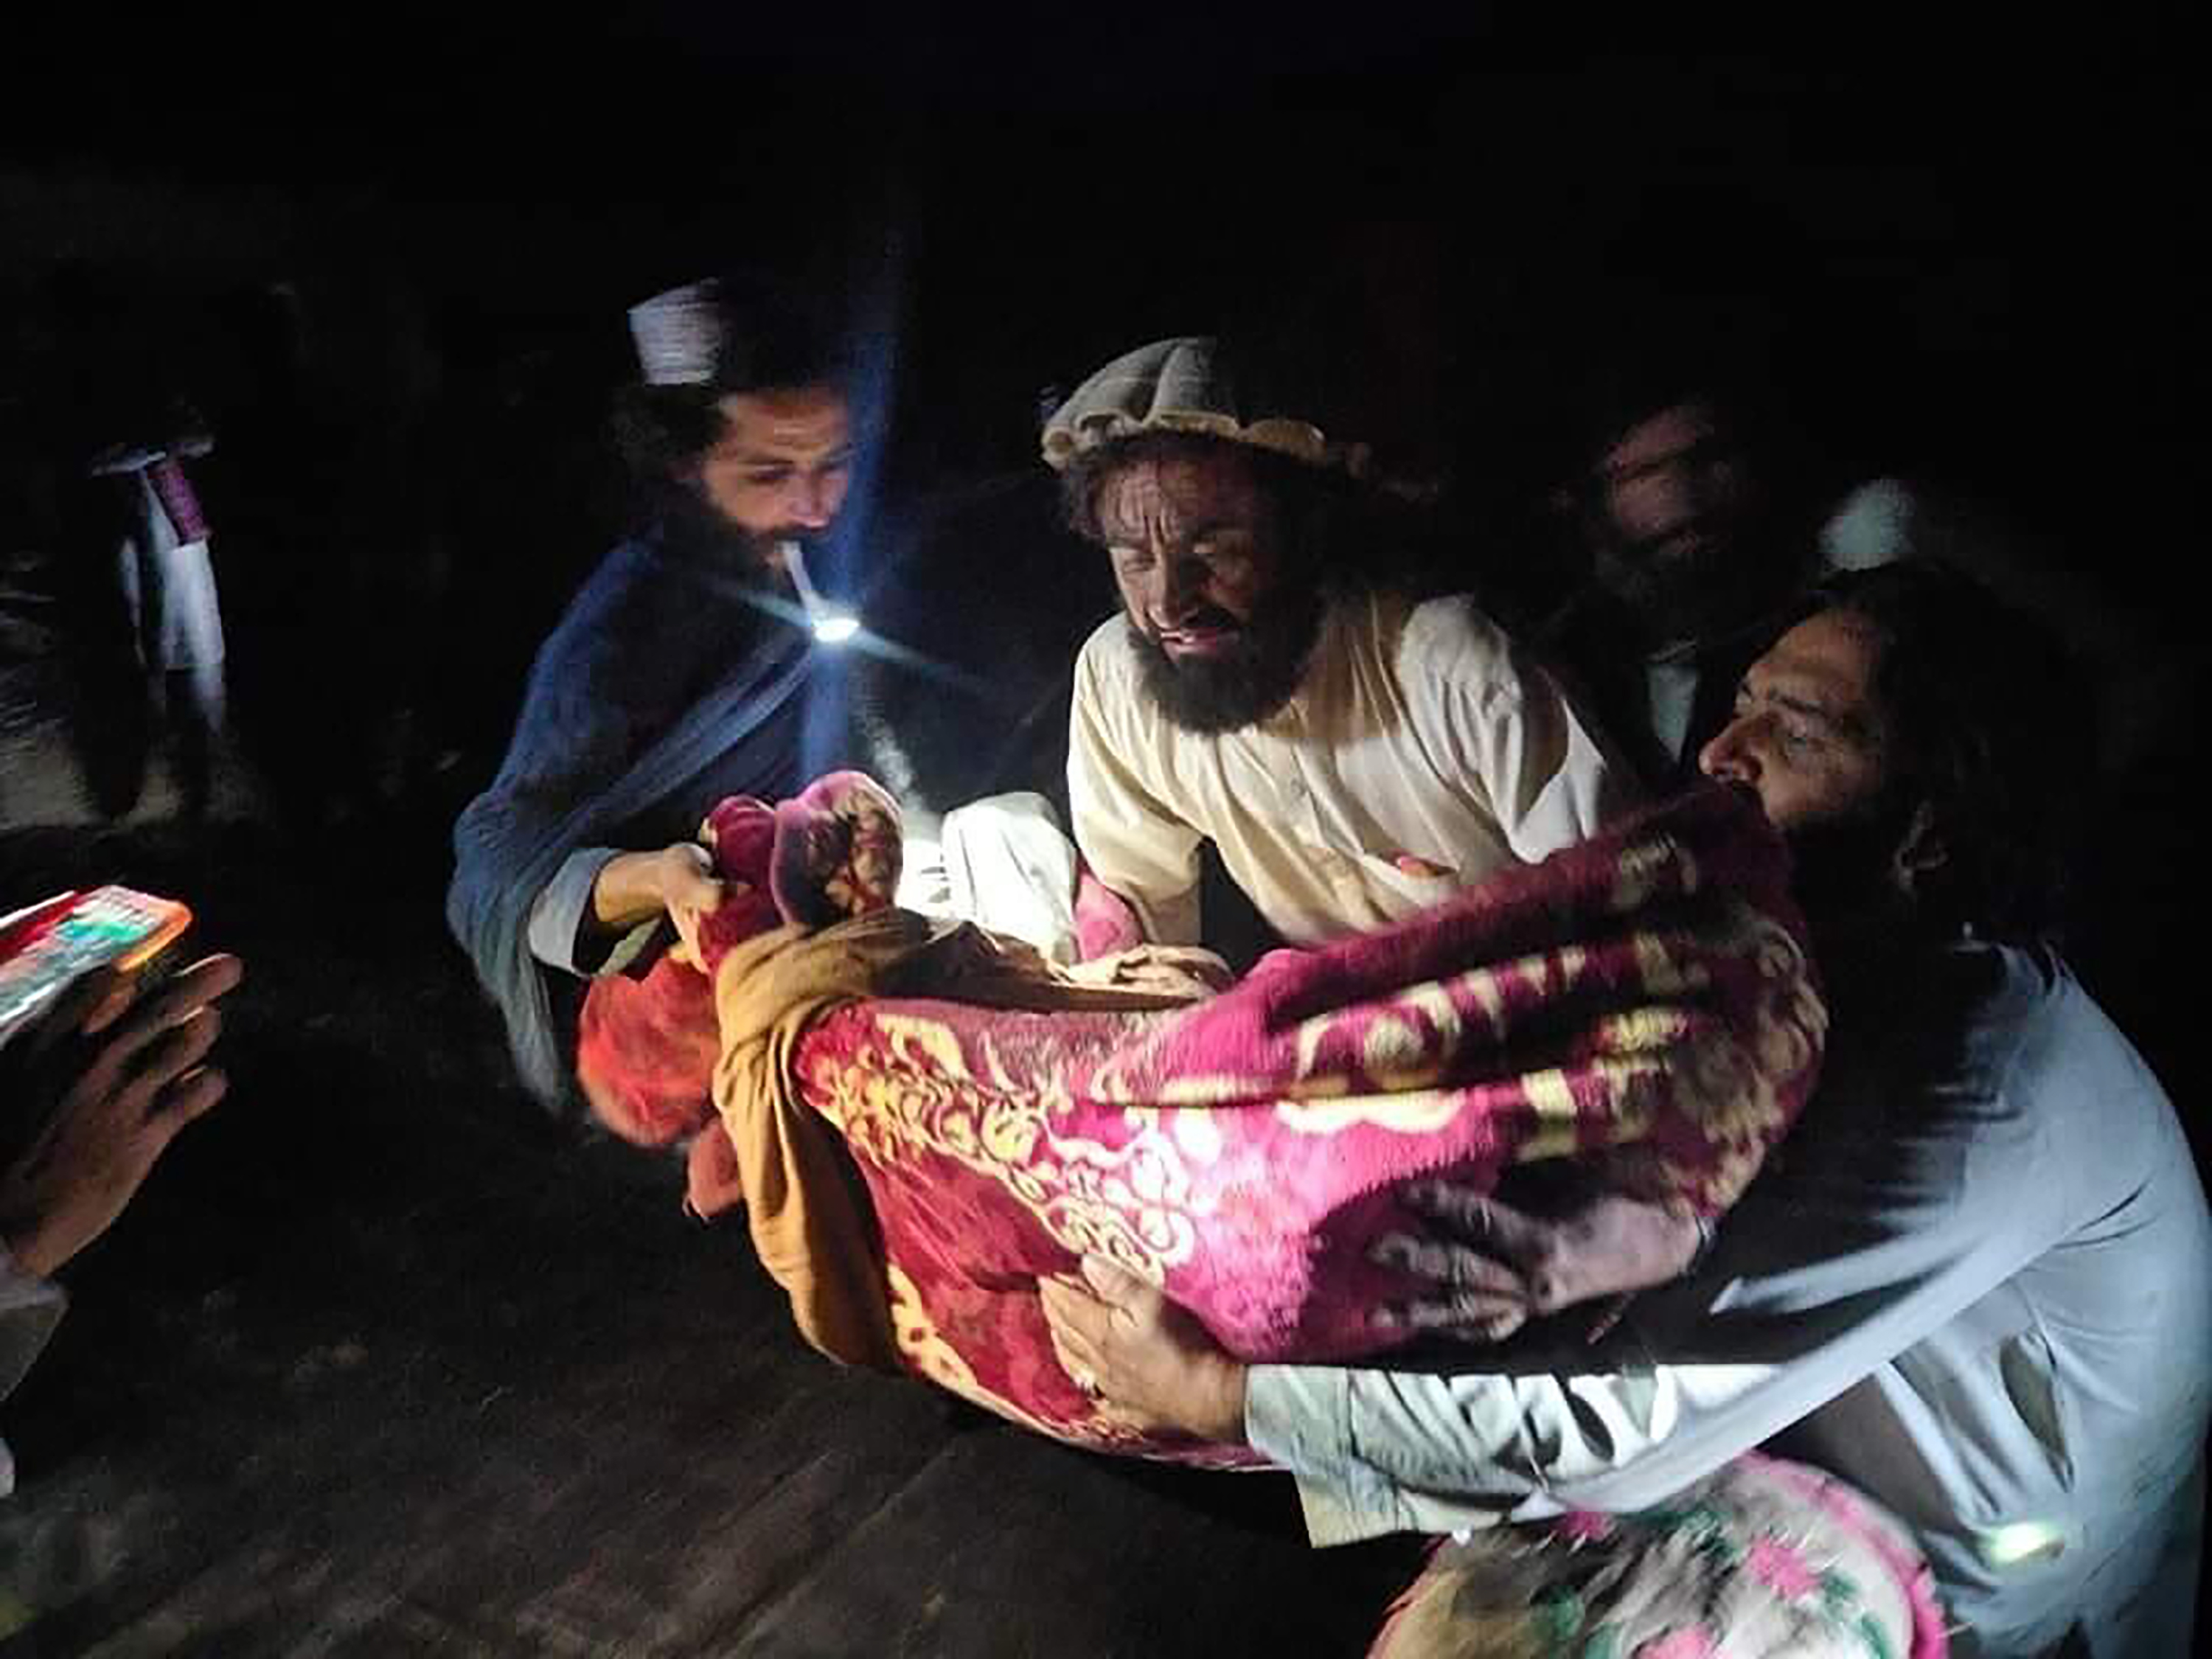 People evacuate wounded in an earthquake in the province of Paktika, eastern Afghanistan, on Wednesday.